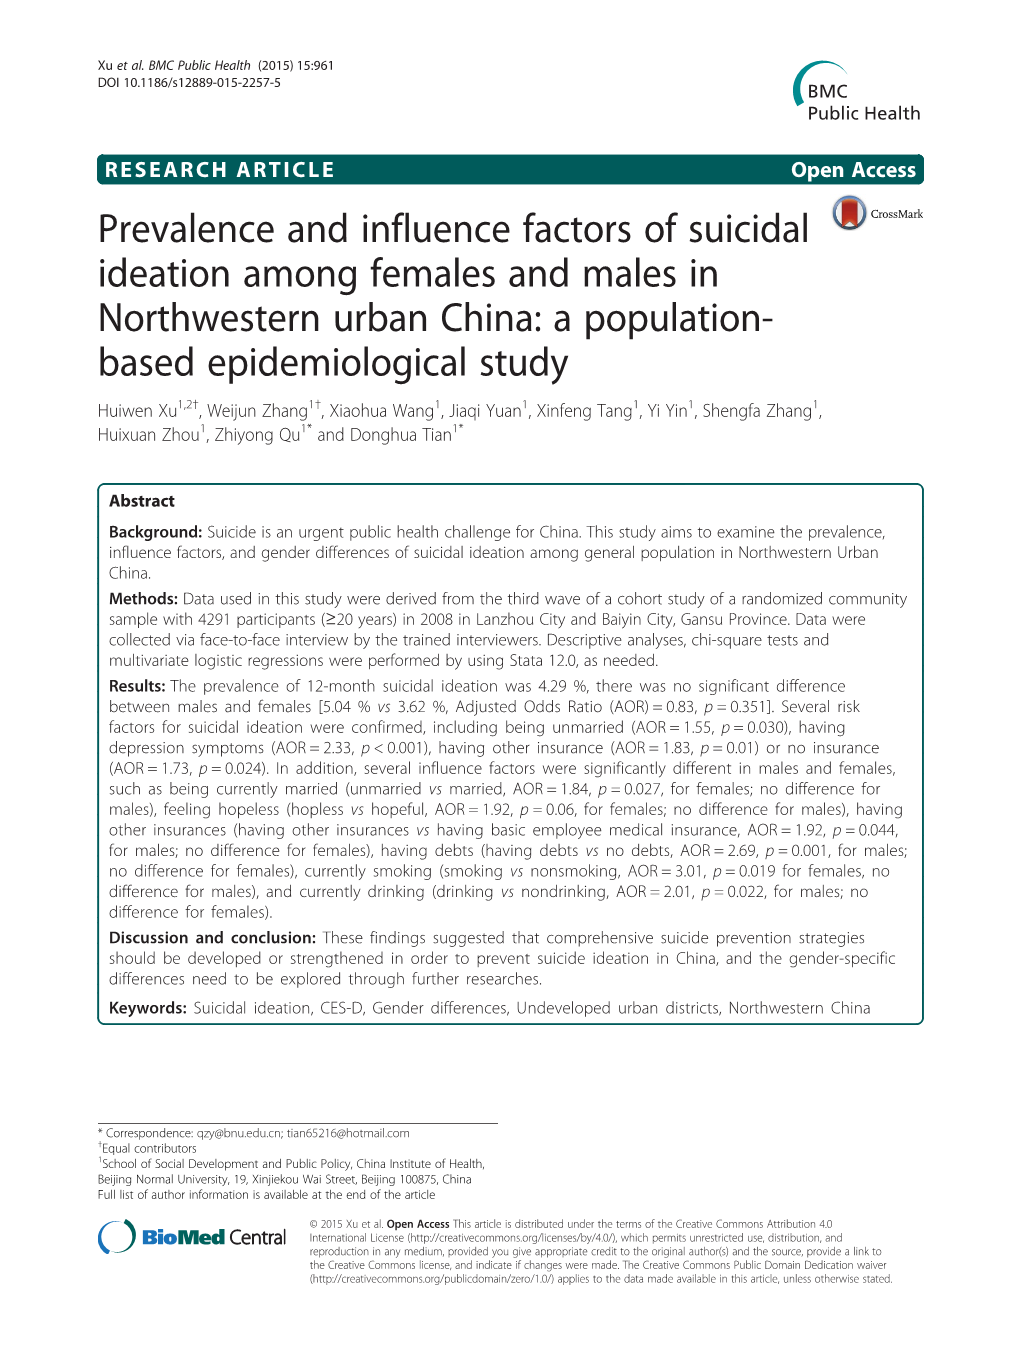 Prevalence and Influence Factors of Suicidal Ideation Among Females and Males in Northwestern Urban China